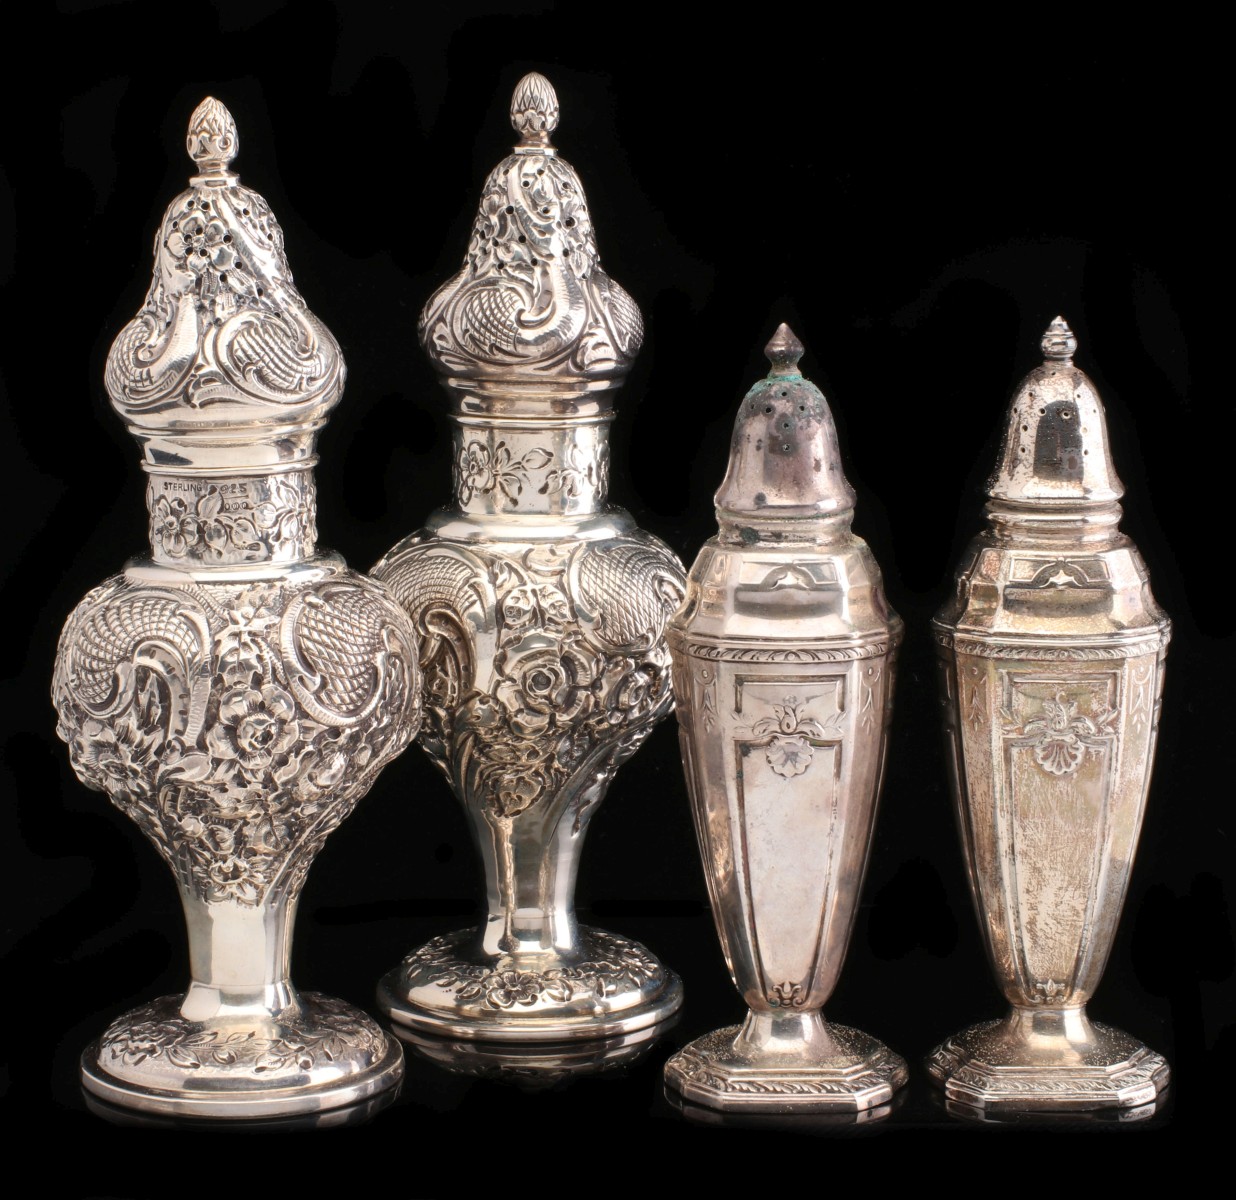 ORNATE CHASED STERLING SILVER SHAKER PAIRS